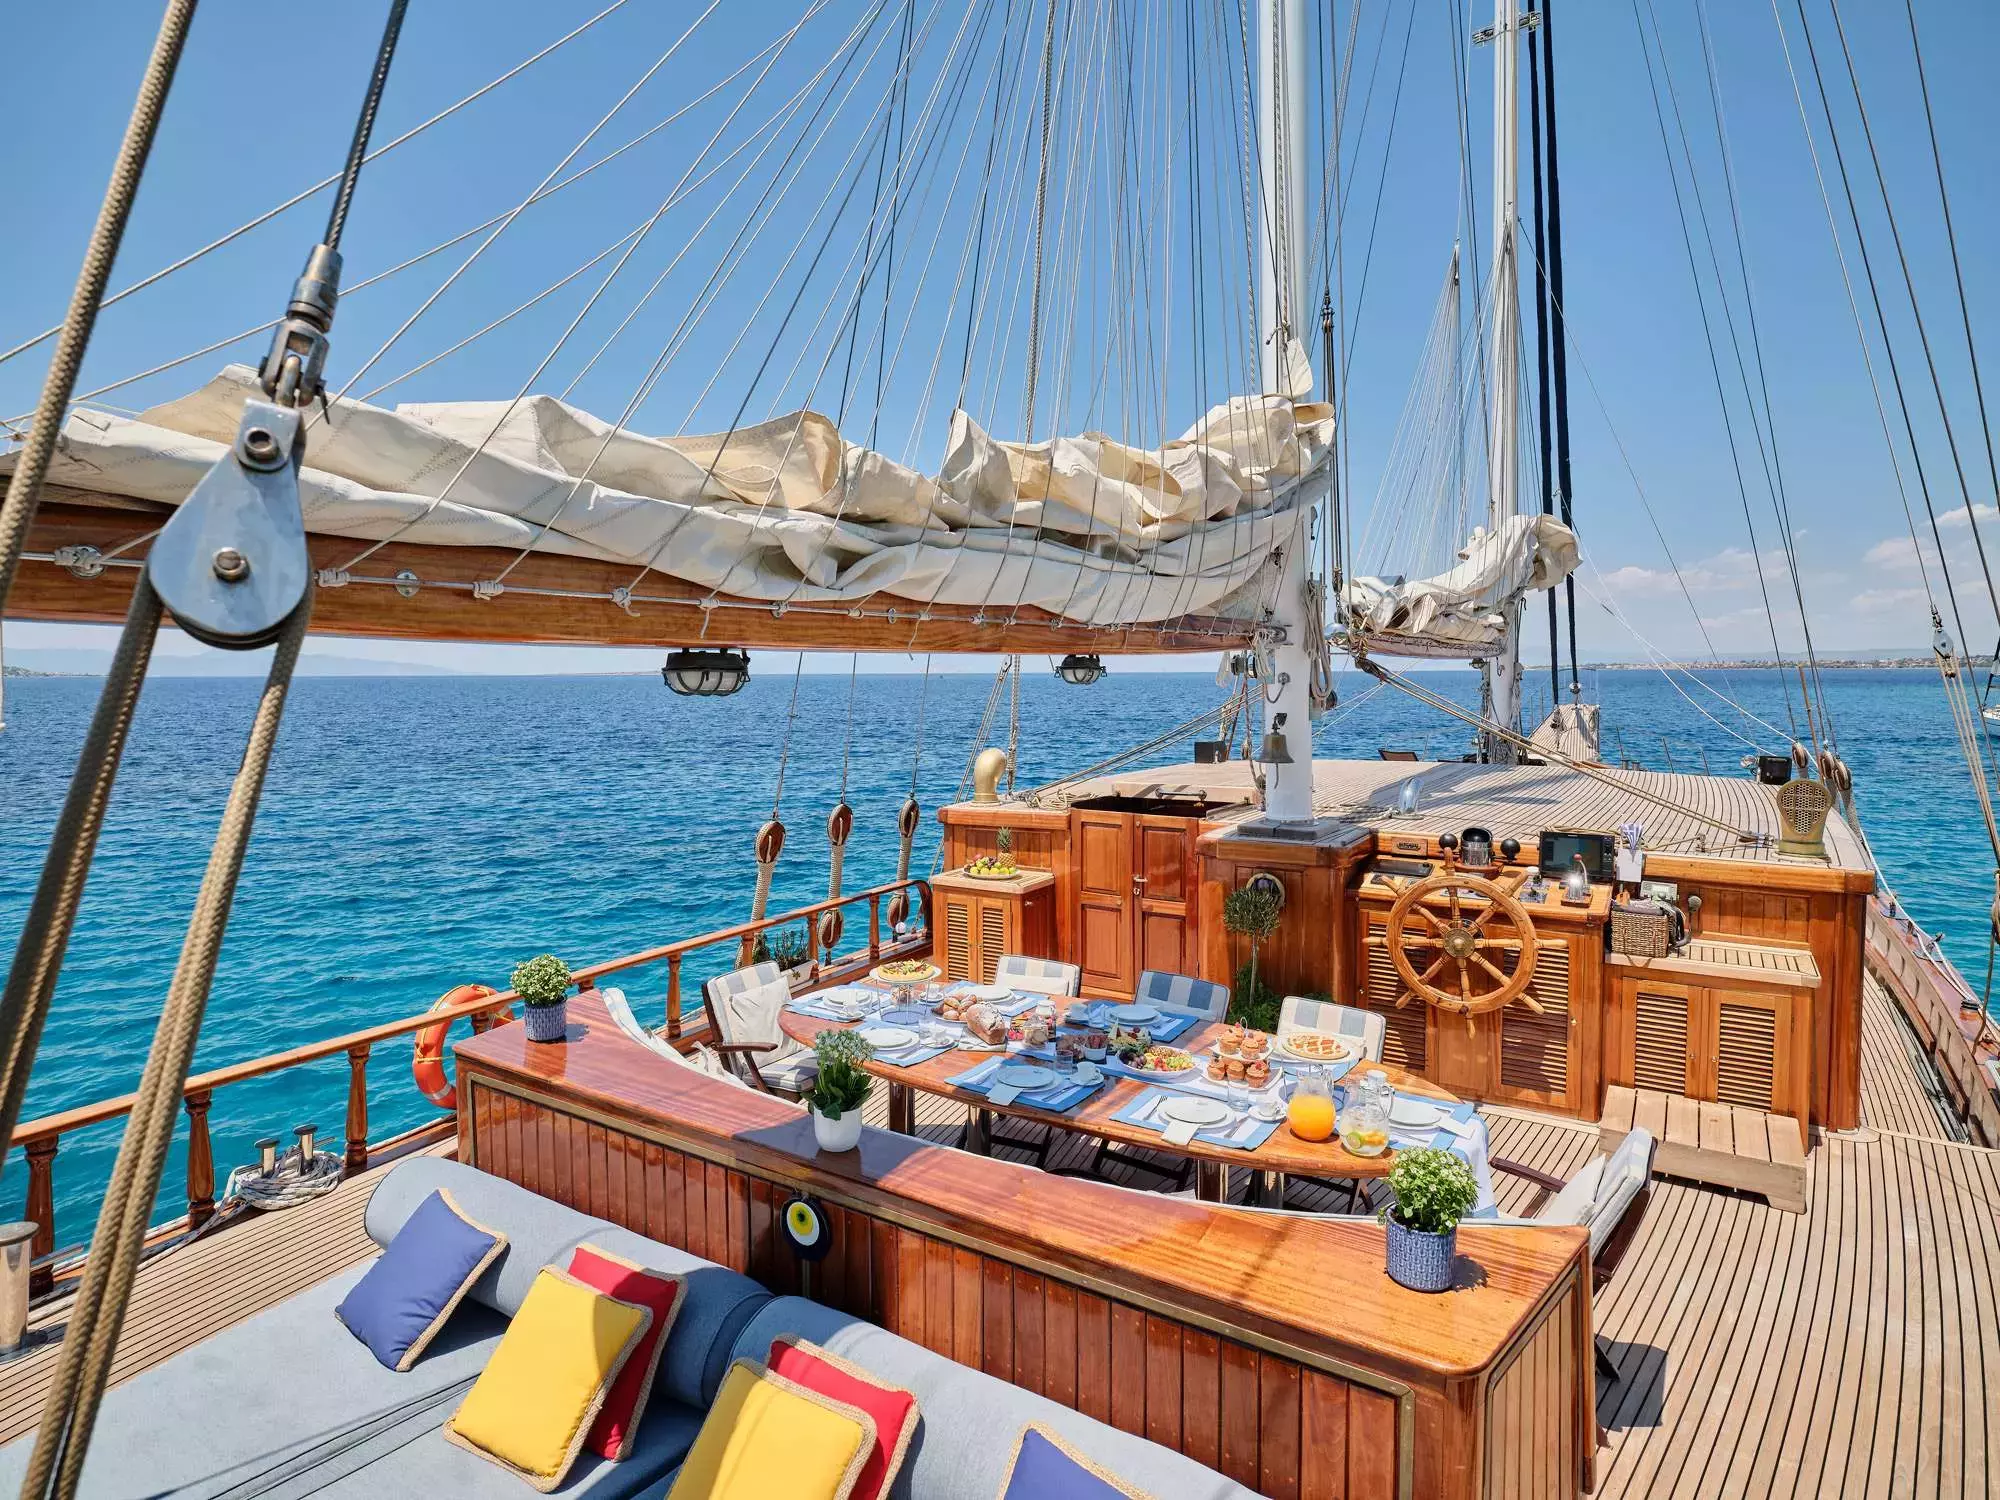 Myra by Ege Yat - Top rates for a Charter of a private Motor Sailer in Italy